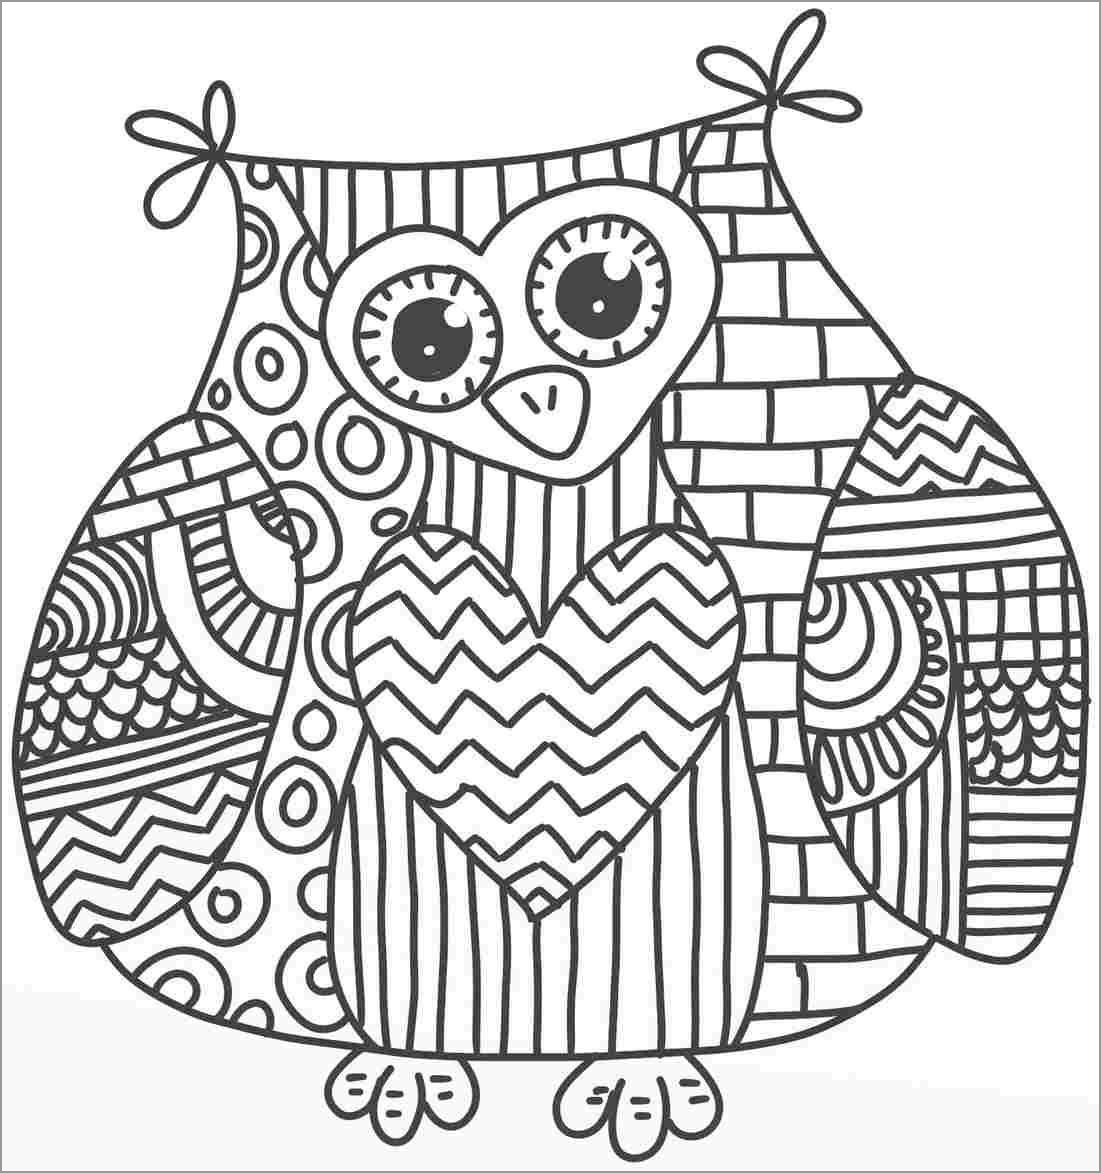 Owl Coloring Pages for Adults